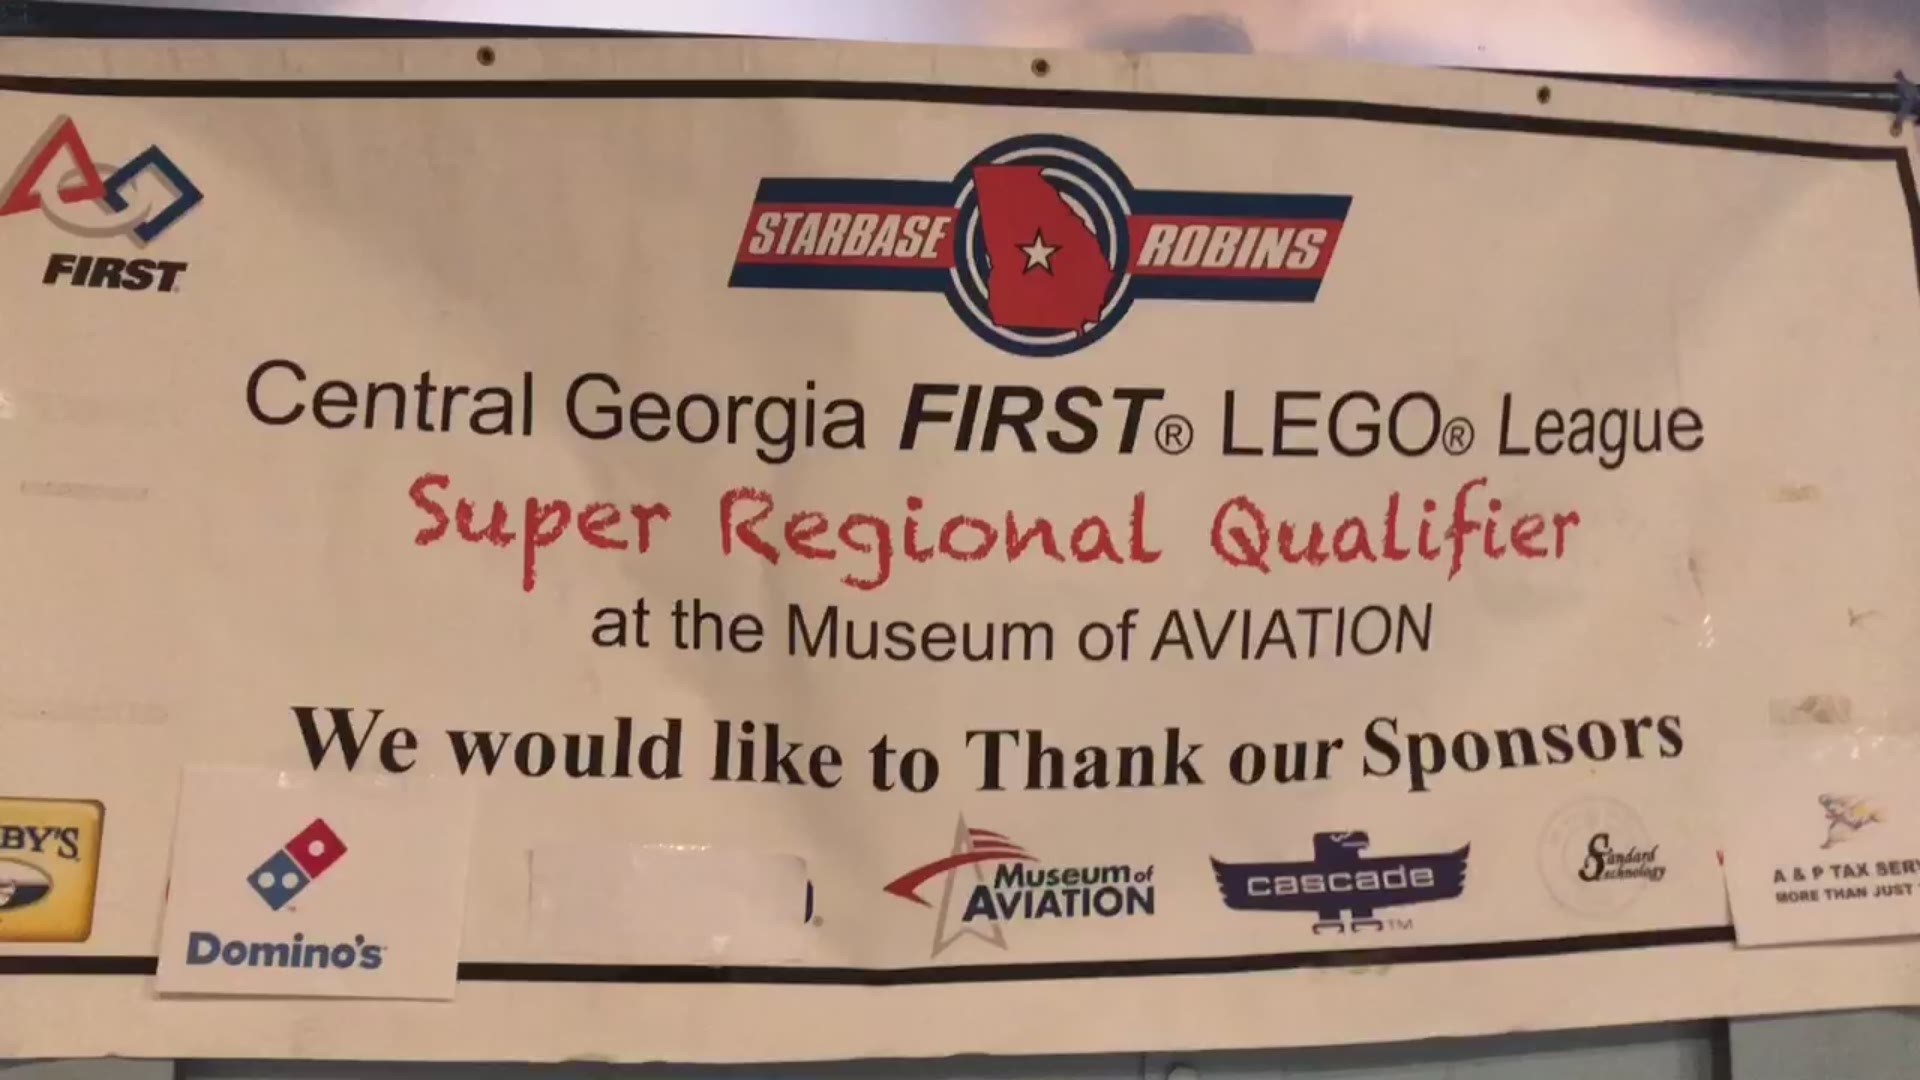 Over 30 teams from all over the state of Georgia filled the Century of Flight hangar in Warner Robins to compete in the super regional qualifier.